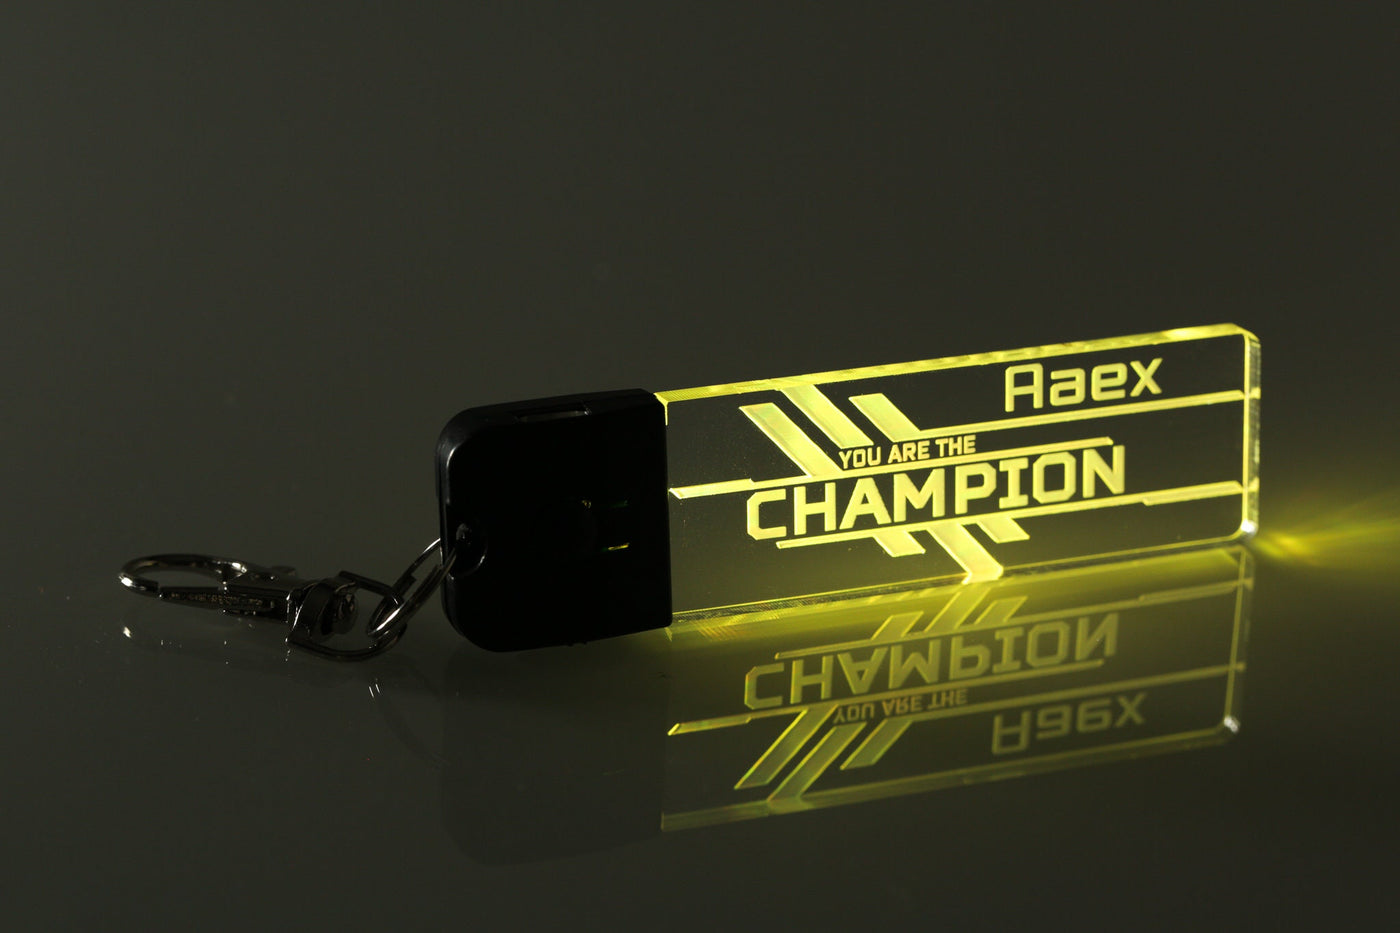 Personalized Apex Legends Key chain - Made in USA - Color Changing - Stocking Stuffer - Acrylic Keychain - Jones Creativity